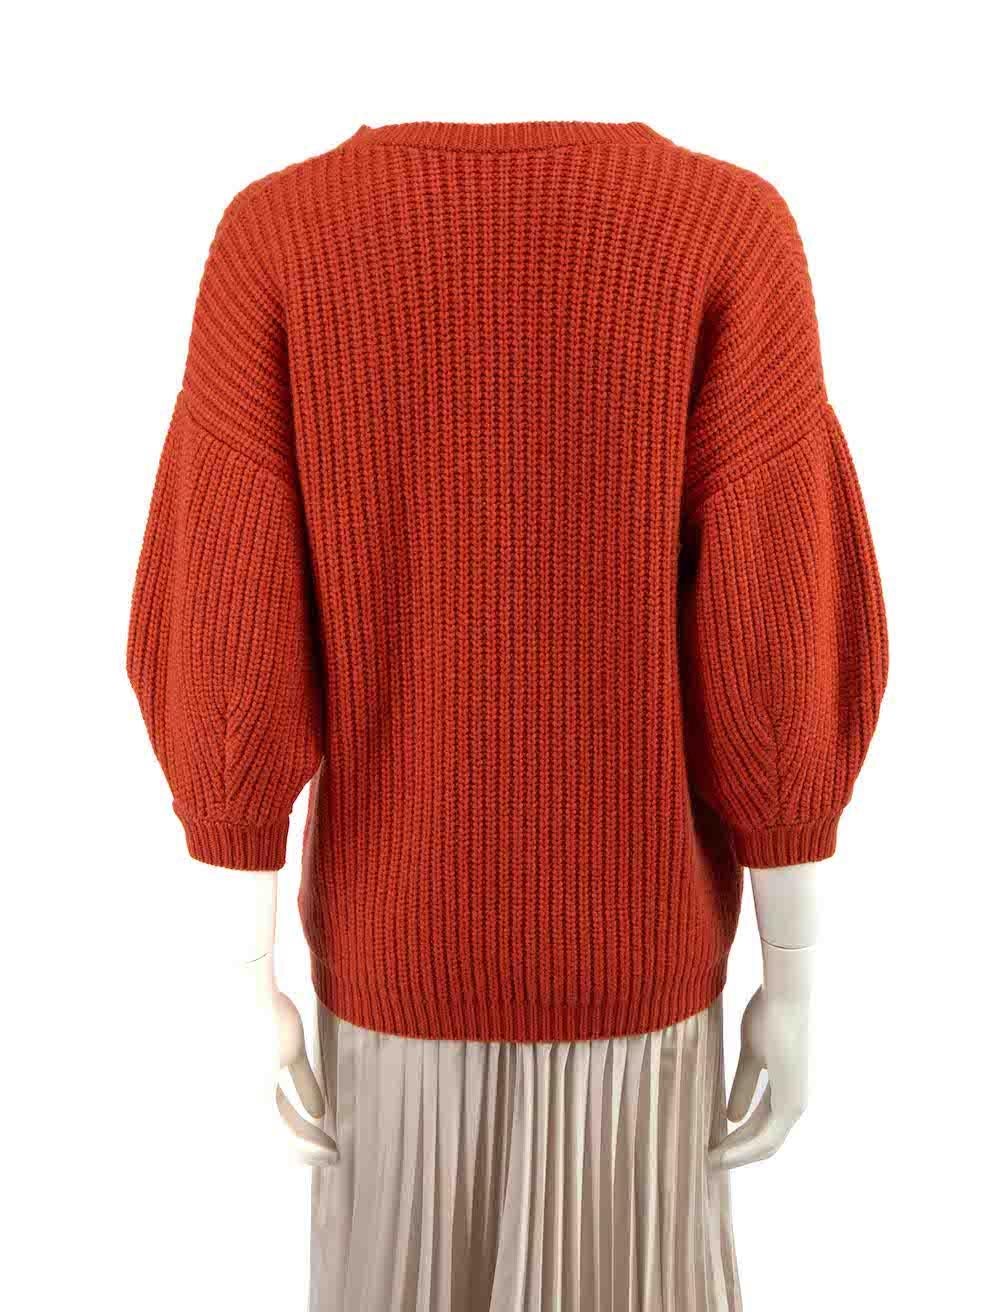 Brunello Cucinelli Orange Knit Mid Sleeves Top Size M In Good Condition For Sale In London, GB